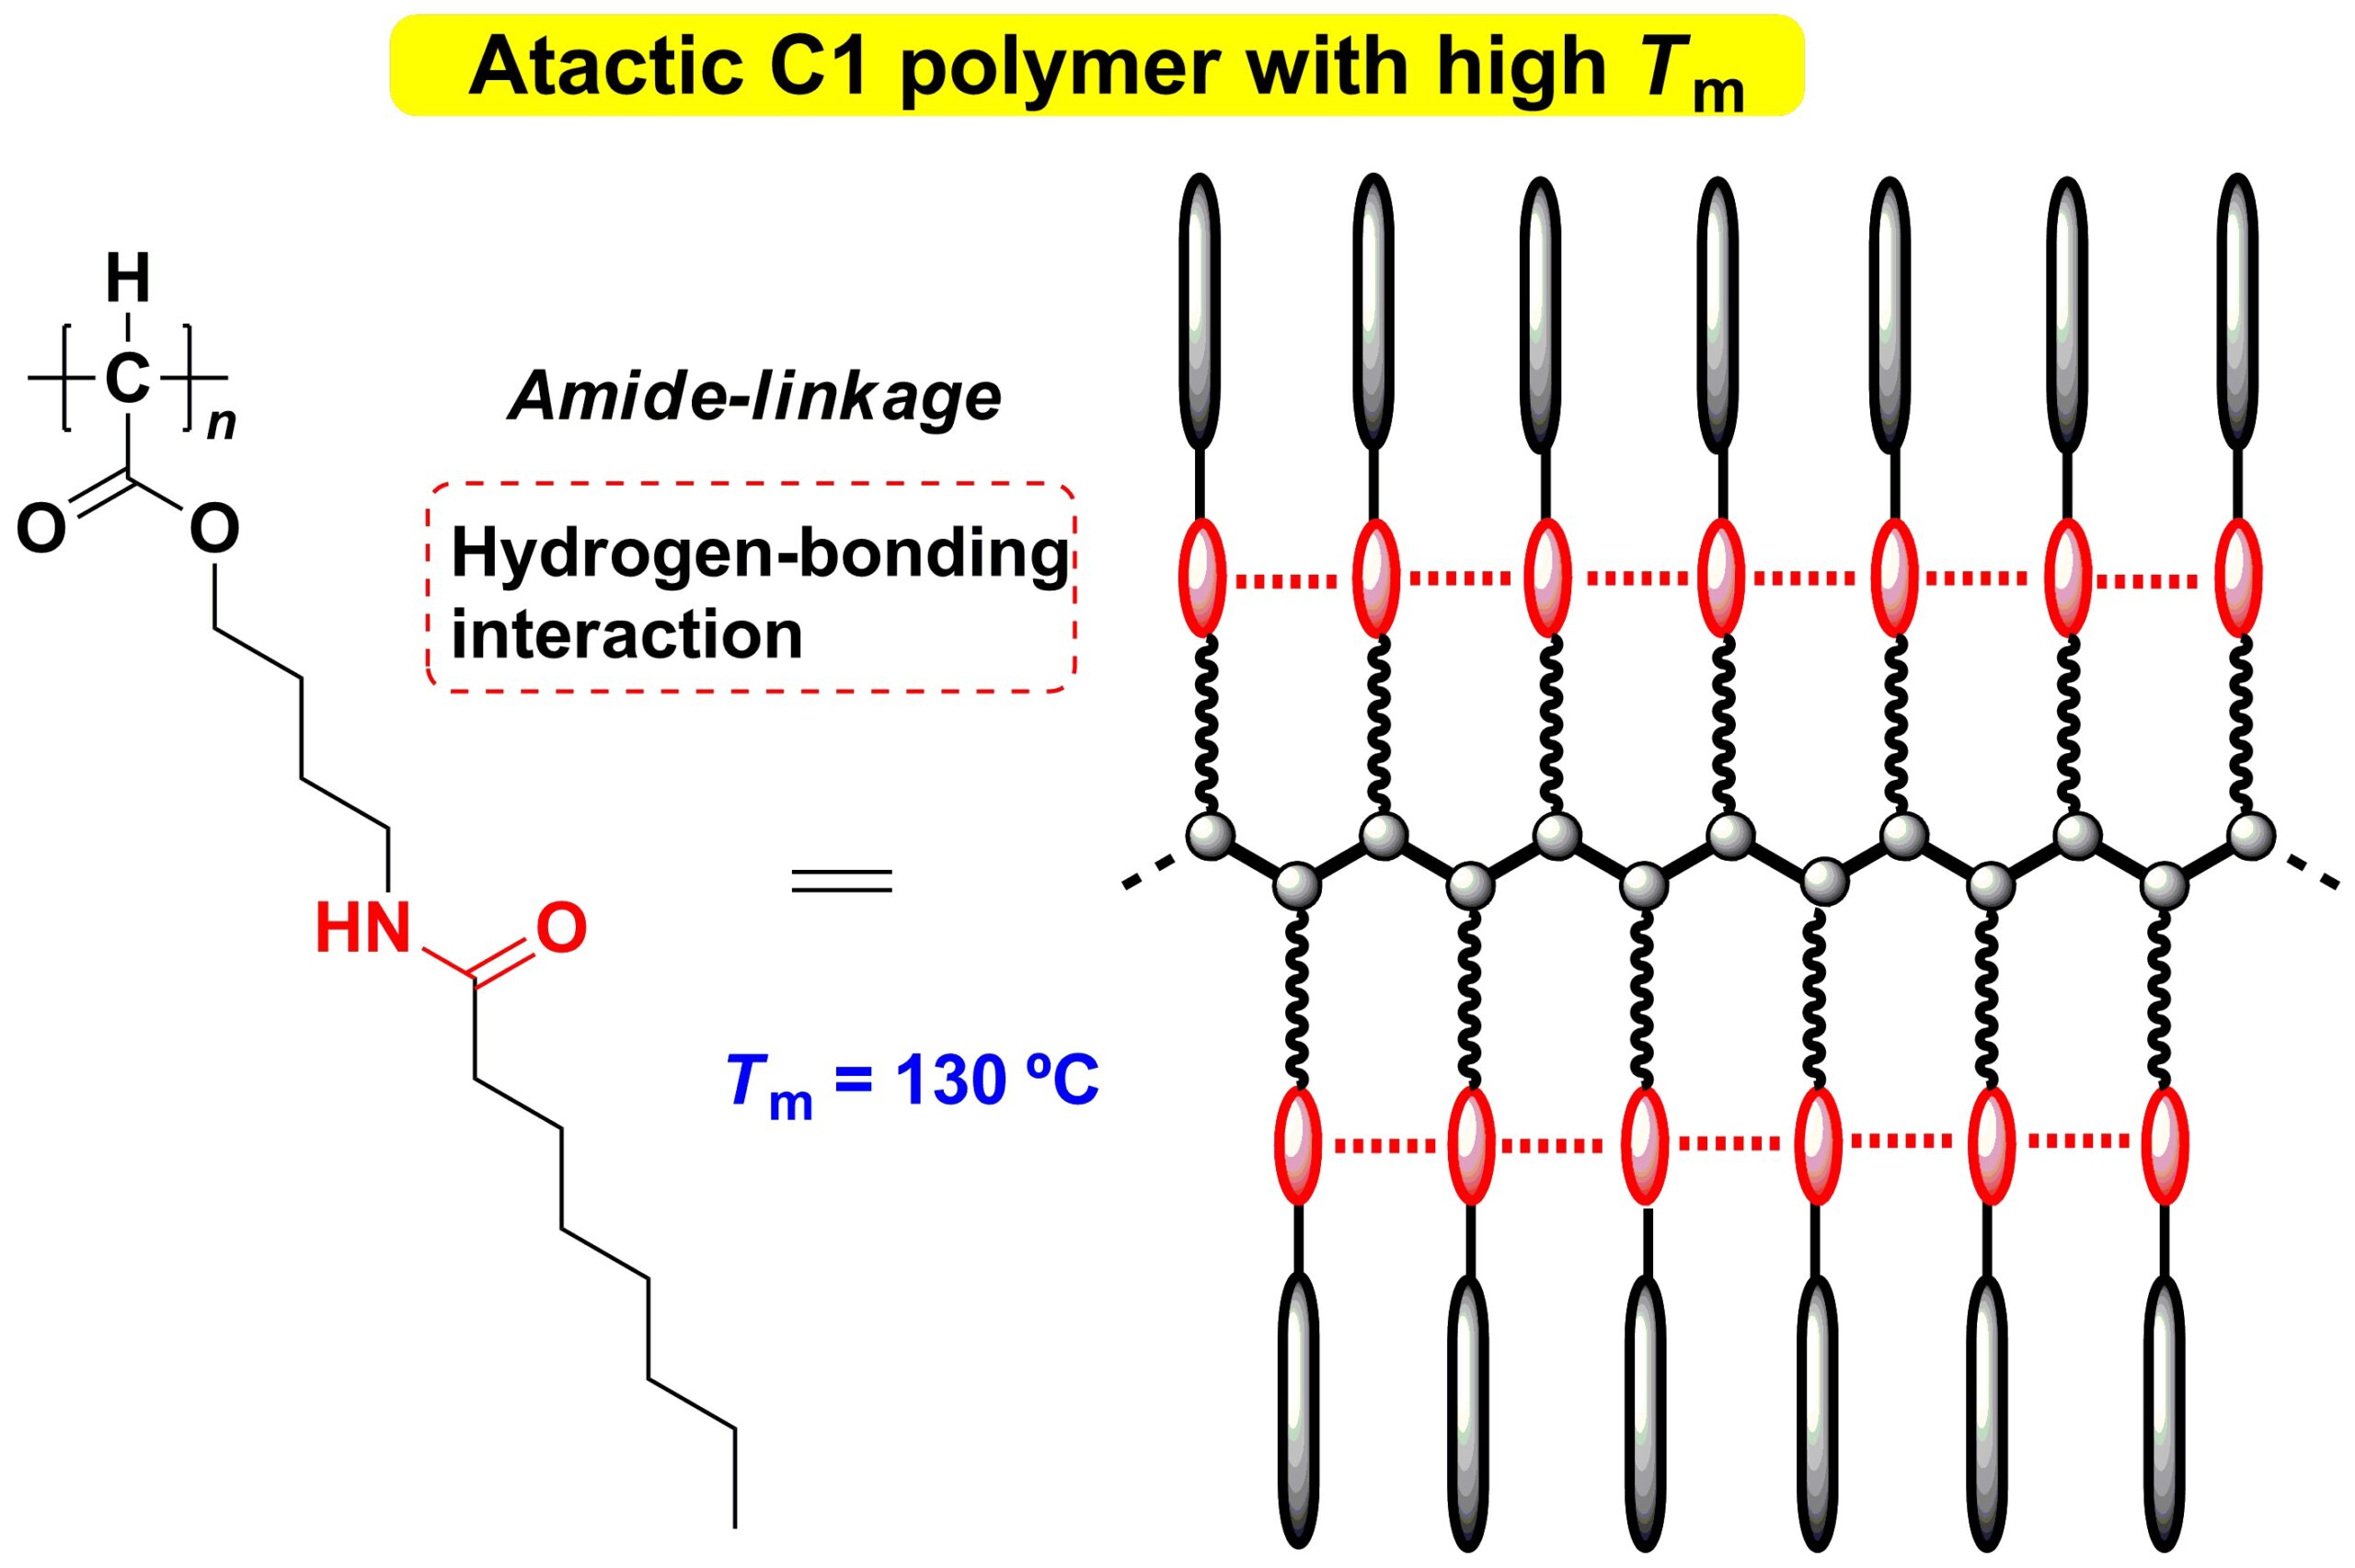 Synthesis of amide-linkage-containing C1 polymers with high melting temperatures